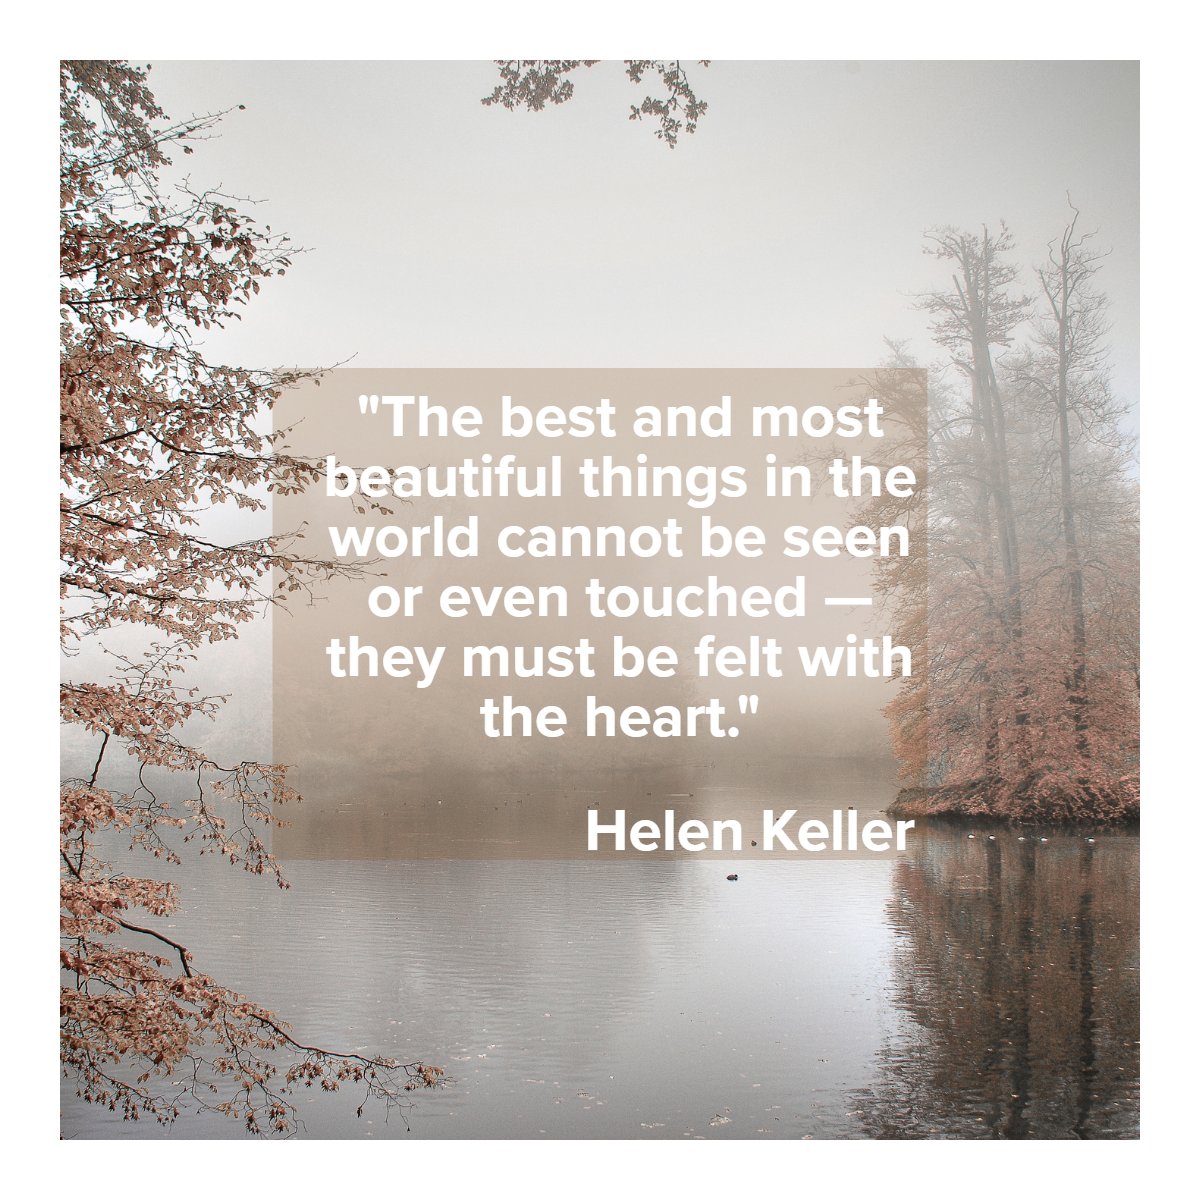 'The best and most beautiful things in the world cannot be seen or even touched - they must be felt with the heart.'
— Helen Keller

 #instaquote    #wisdom    #quoteoftheday 
#YourPerfectHome #CRayBrower #SanJoaquinCounty #StocktonCA #RealEstate